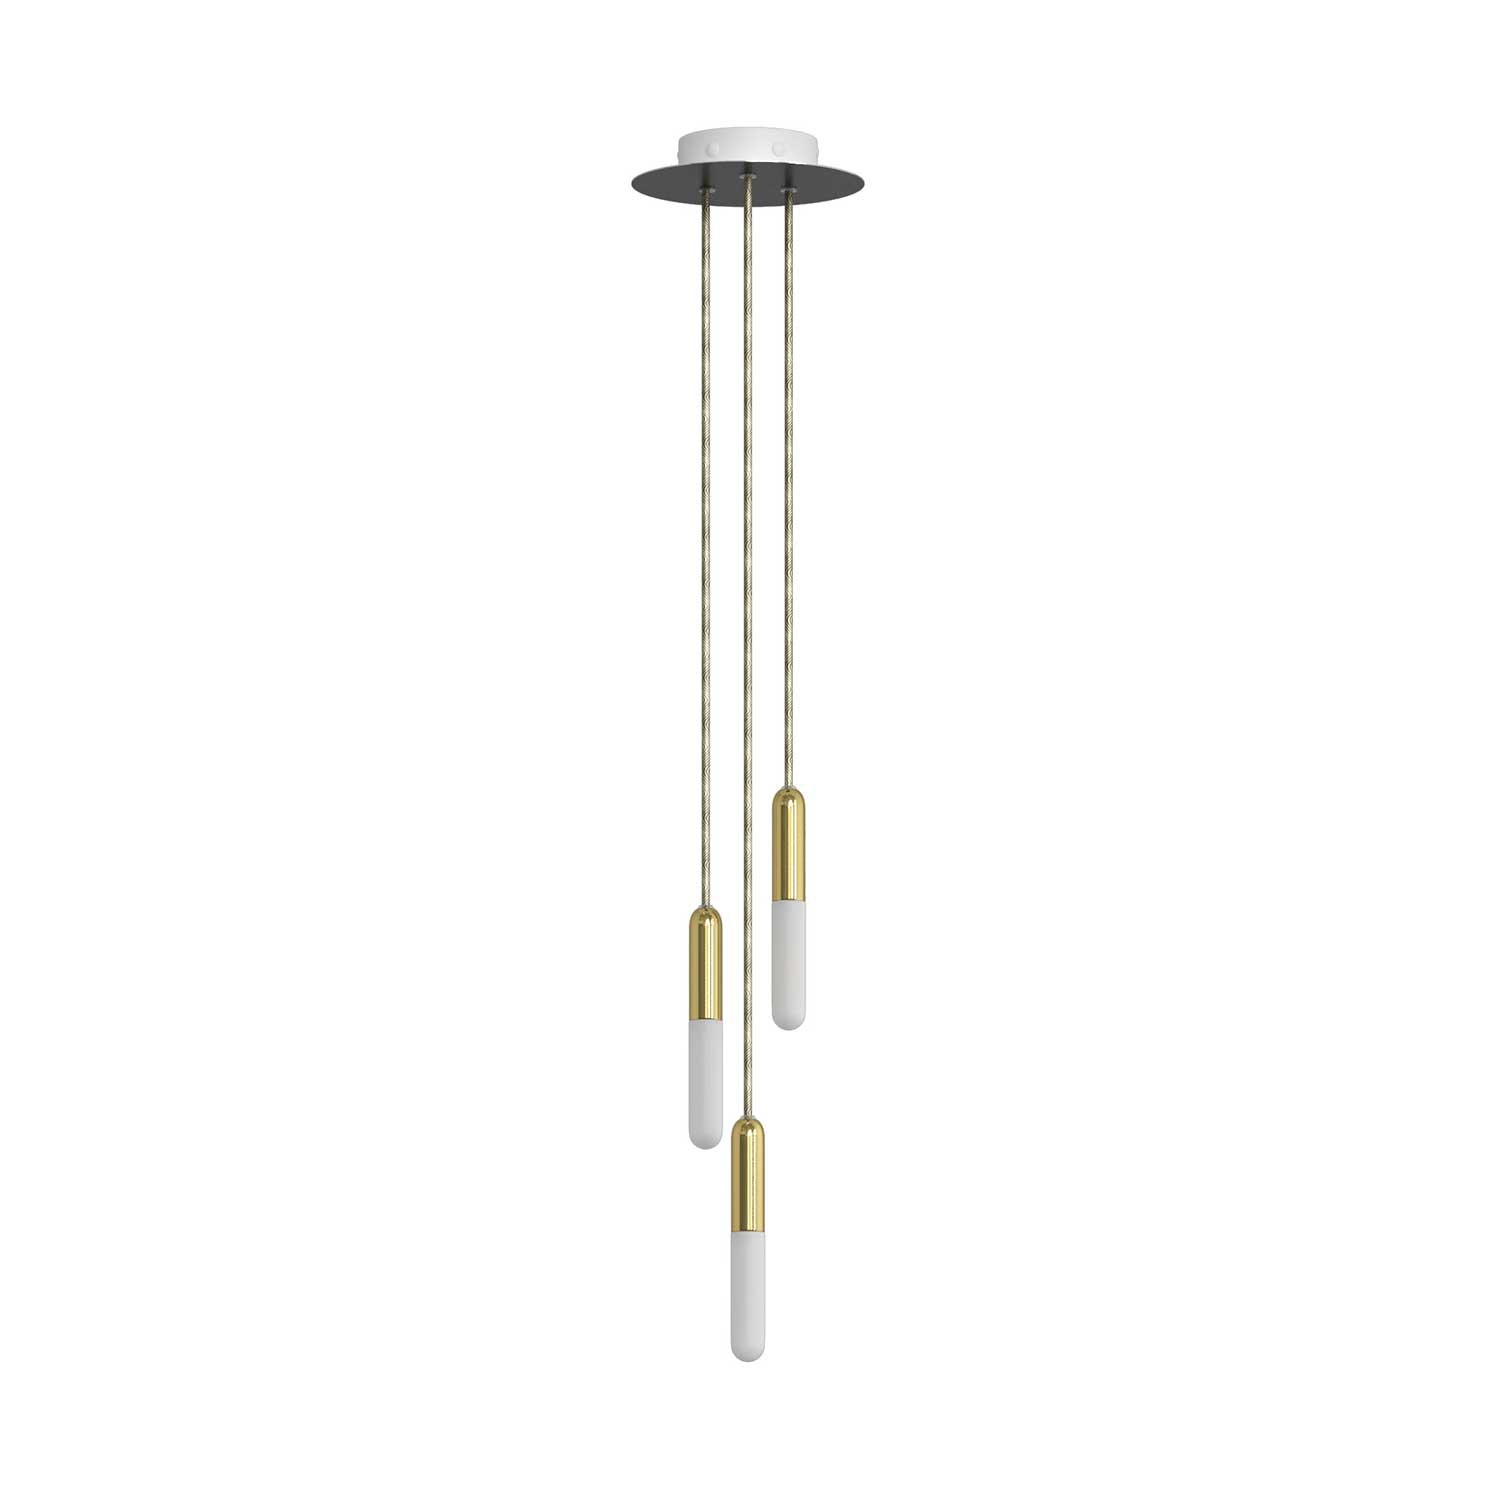 Made in Italy suspension with 3 pendants complete with bulbs, P-Light, and 200 mm Rose-One